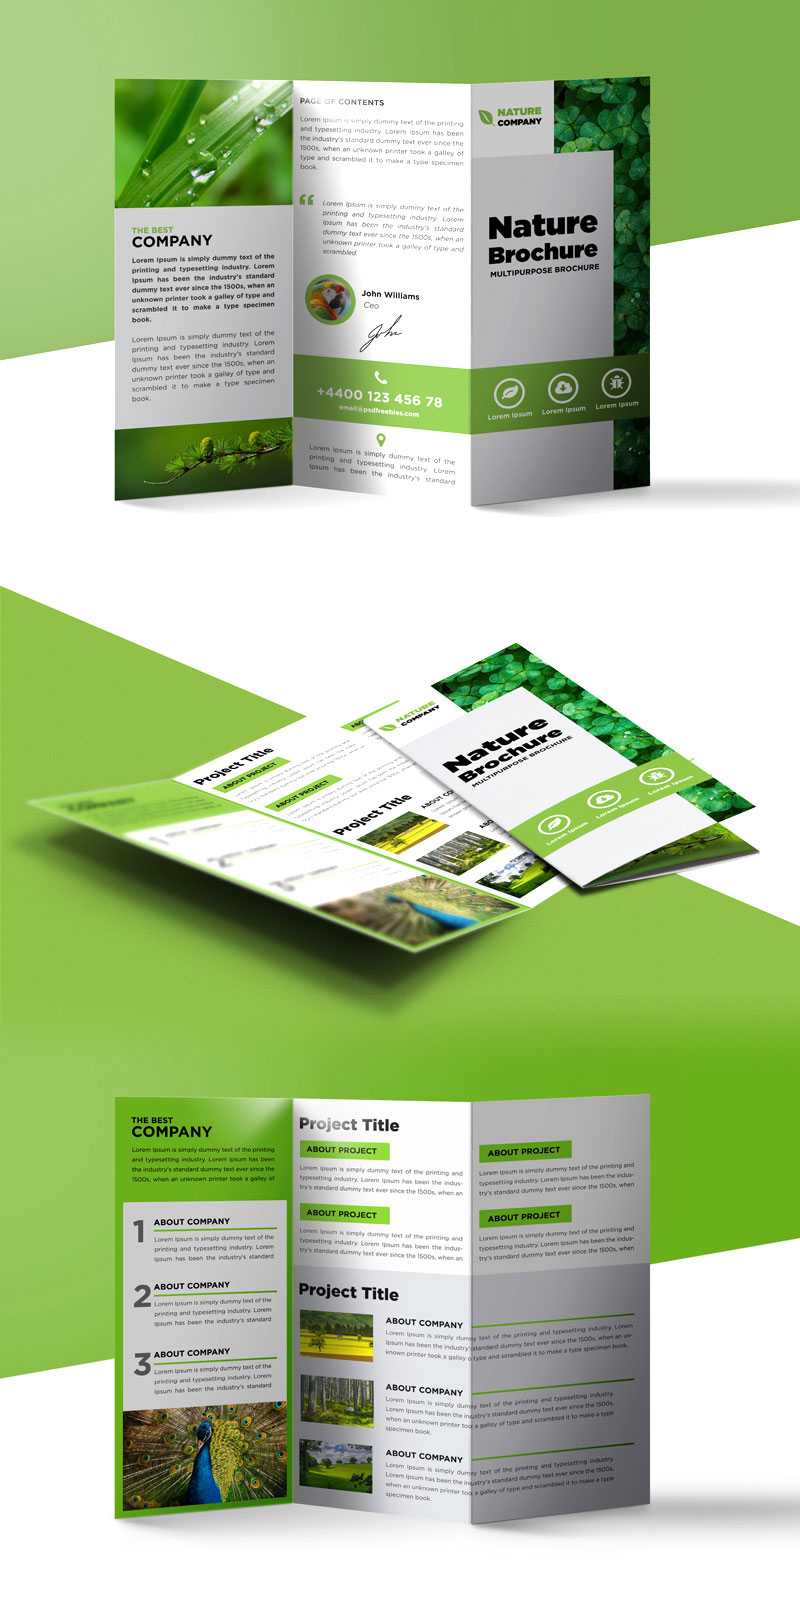 Nature Tri Fold Brochure Template Free Psd | Psdfreebies Regarding 3 Fold Brochure Template Psd Free Download